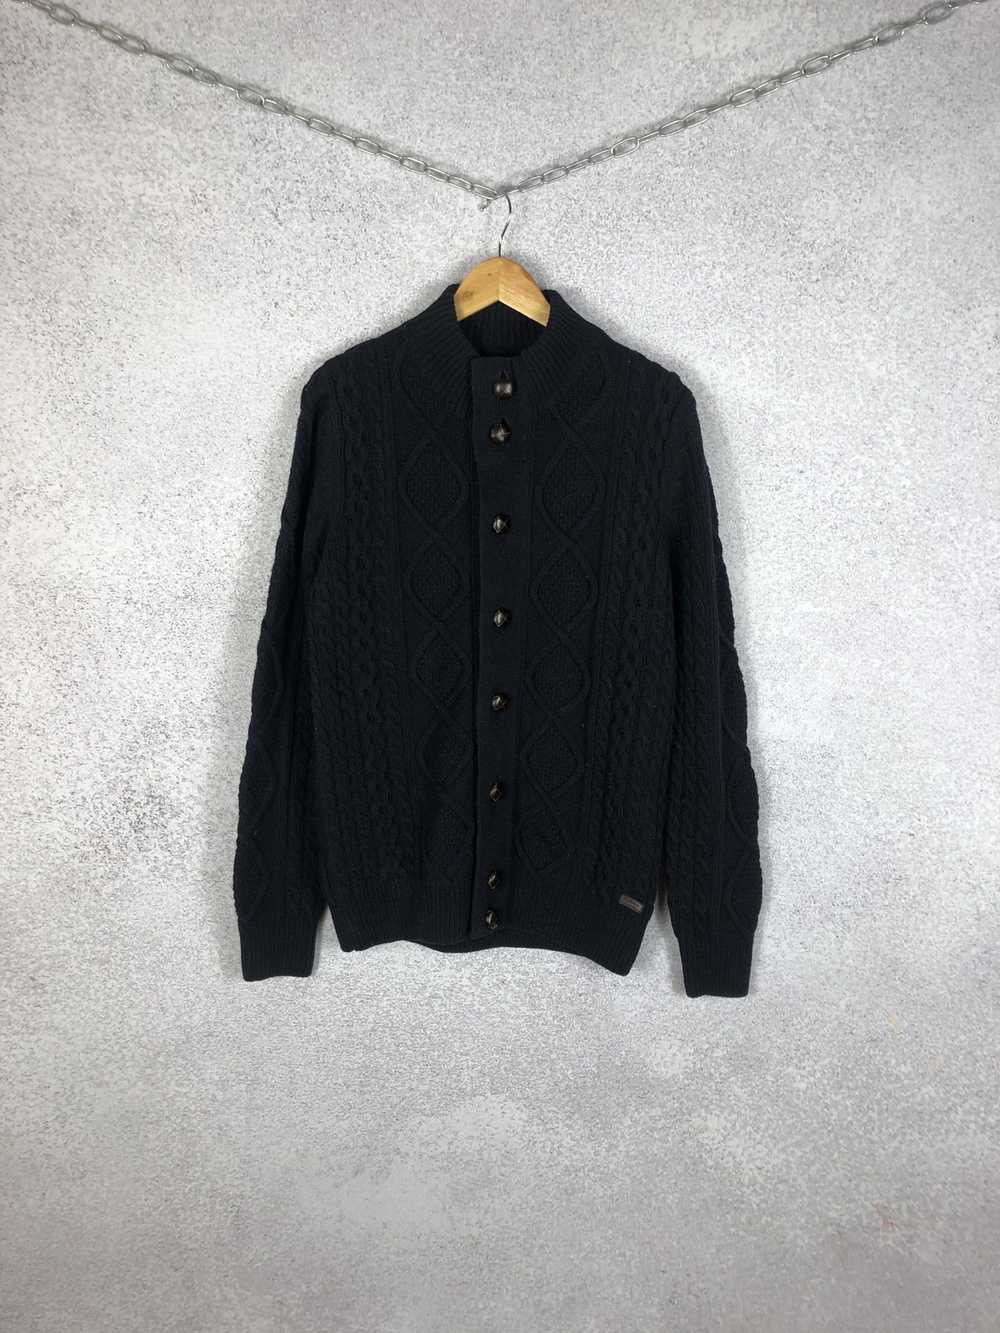 Barbour × Coloured Cable Knit Sweater Vintage Bar… - image 1